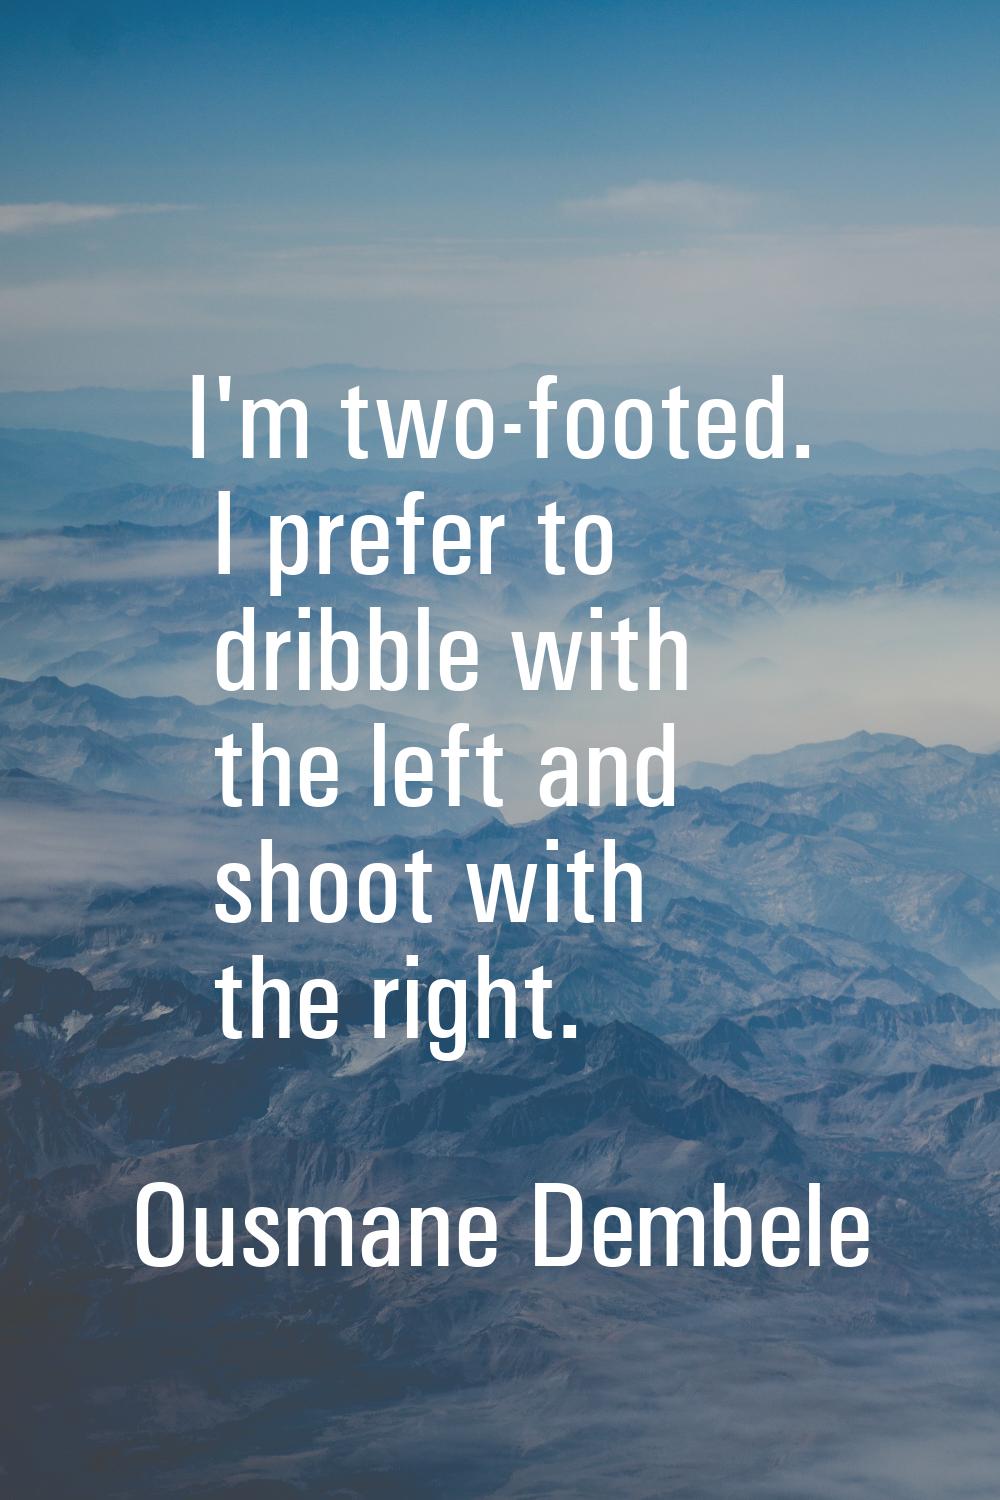 I'm two-footed. I prefer to dribble with the left and shoot with the right.